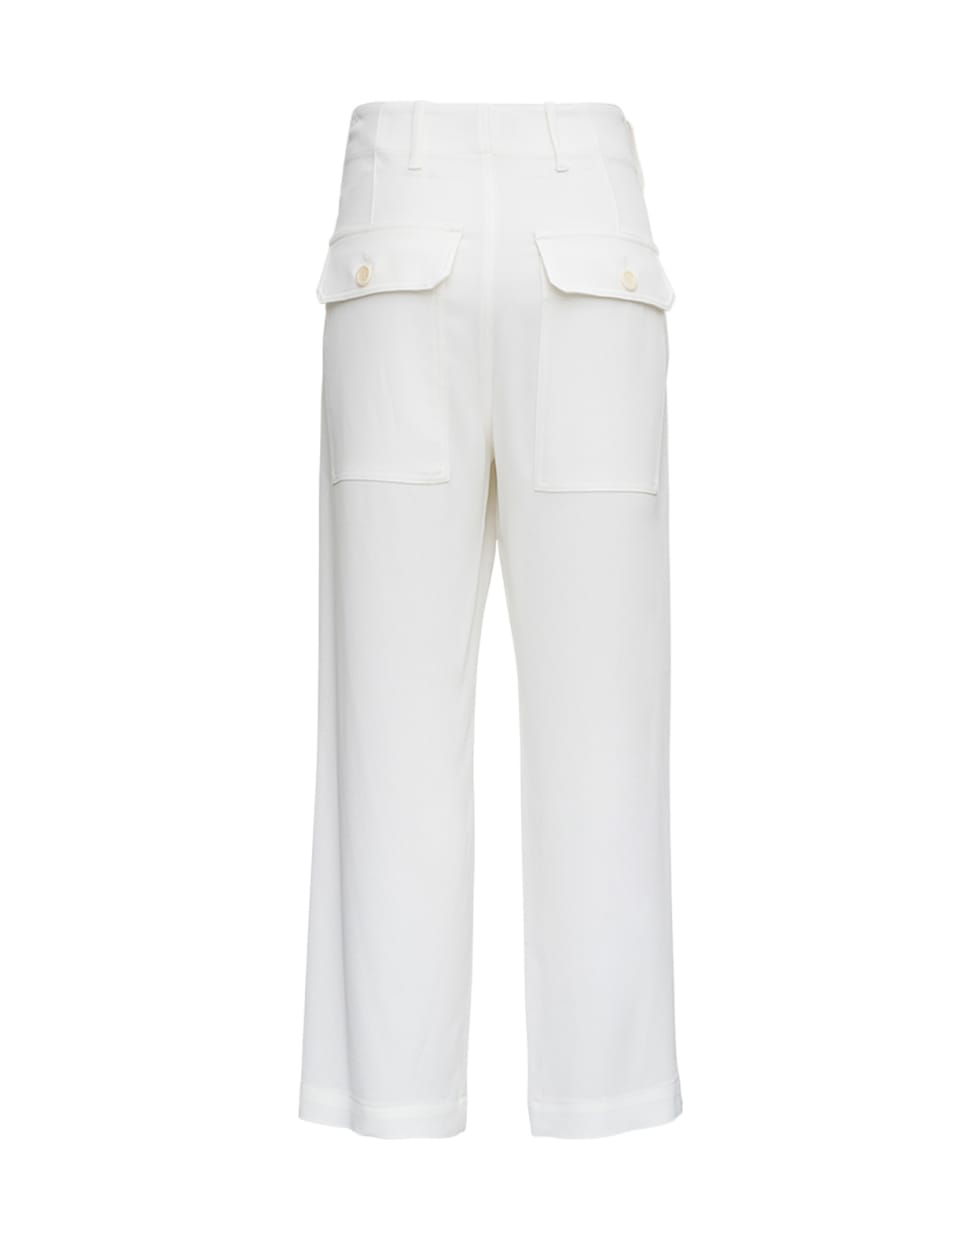 Jejia Camelle In Viscose Blend Trousers With Pockets - White